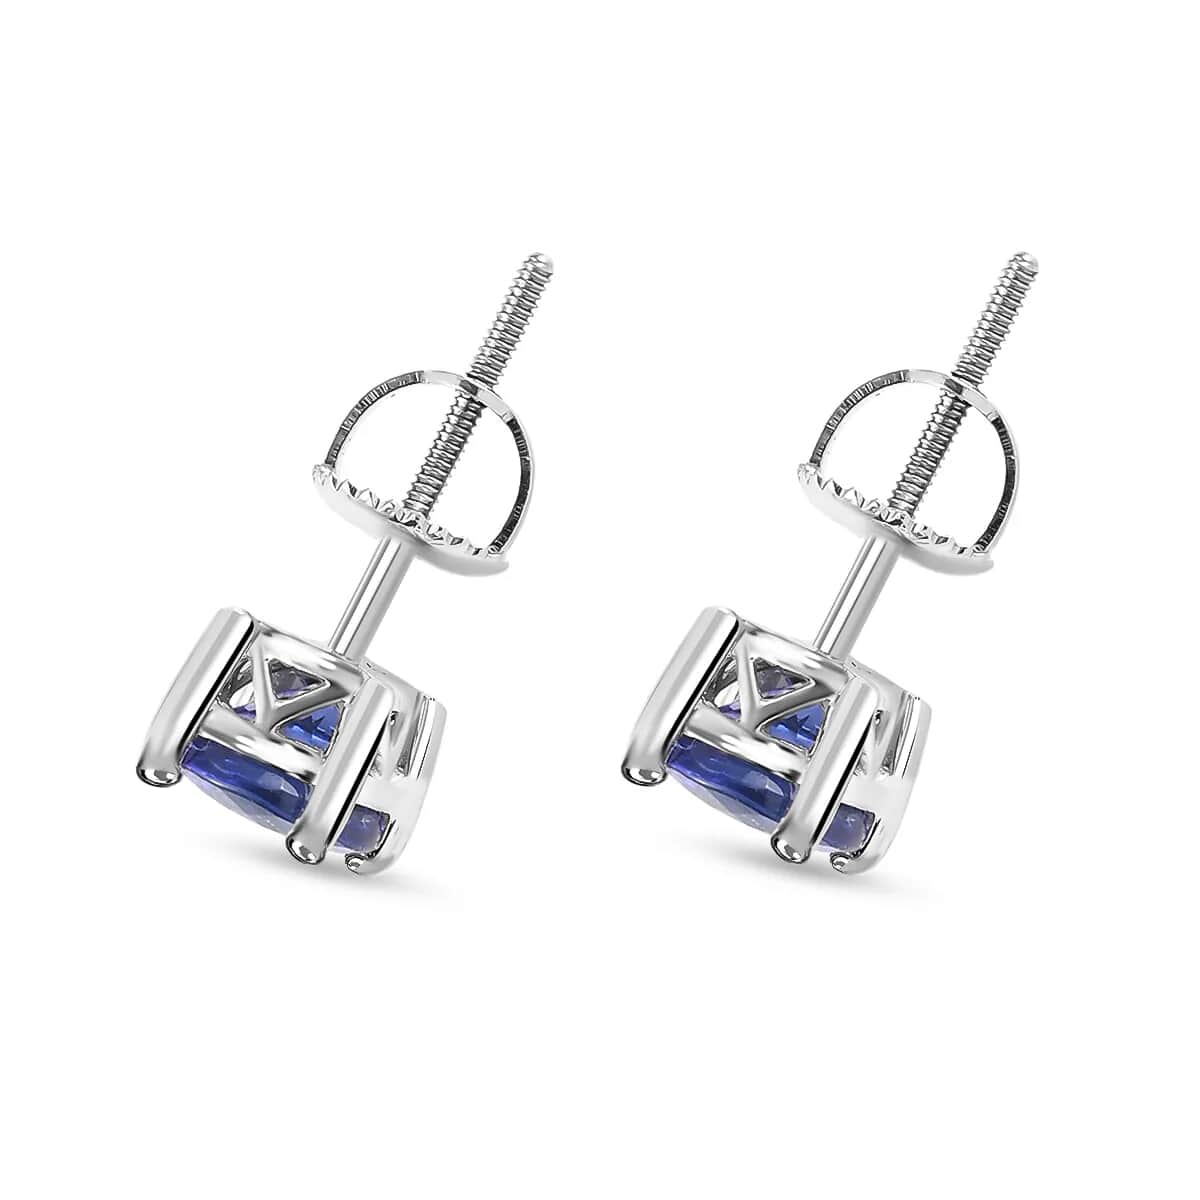 Rhapsody 950 Platinum AAAA Tanzanite Earrings, Tanzanite Studs, Solitaire Platinum Earrings, Weddings Gifts, Birthday Gifts For Her image number 4